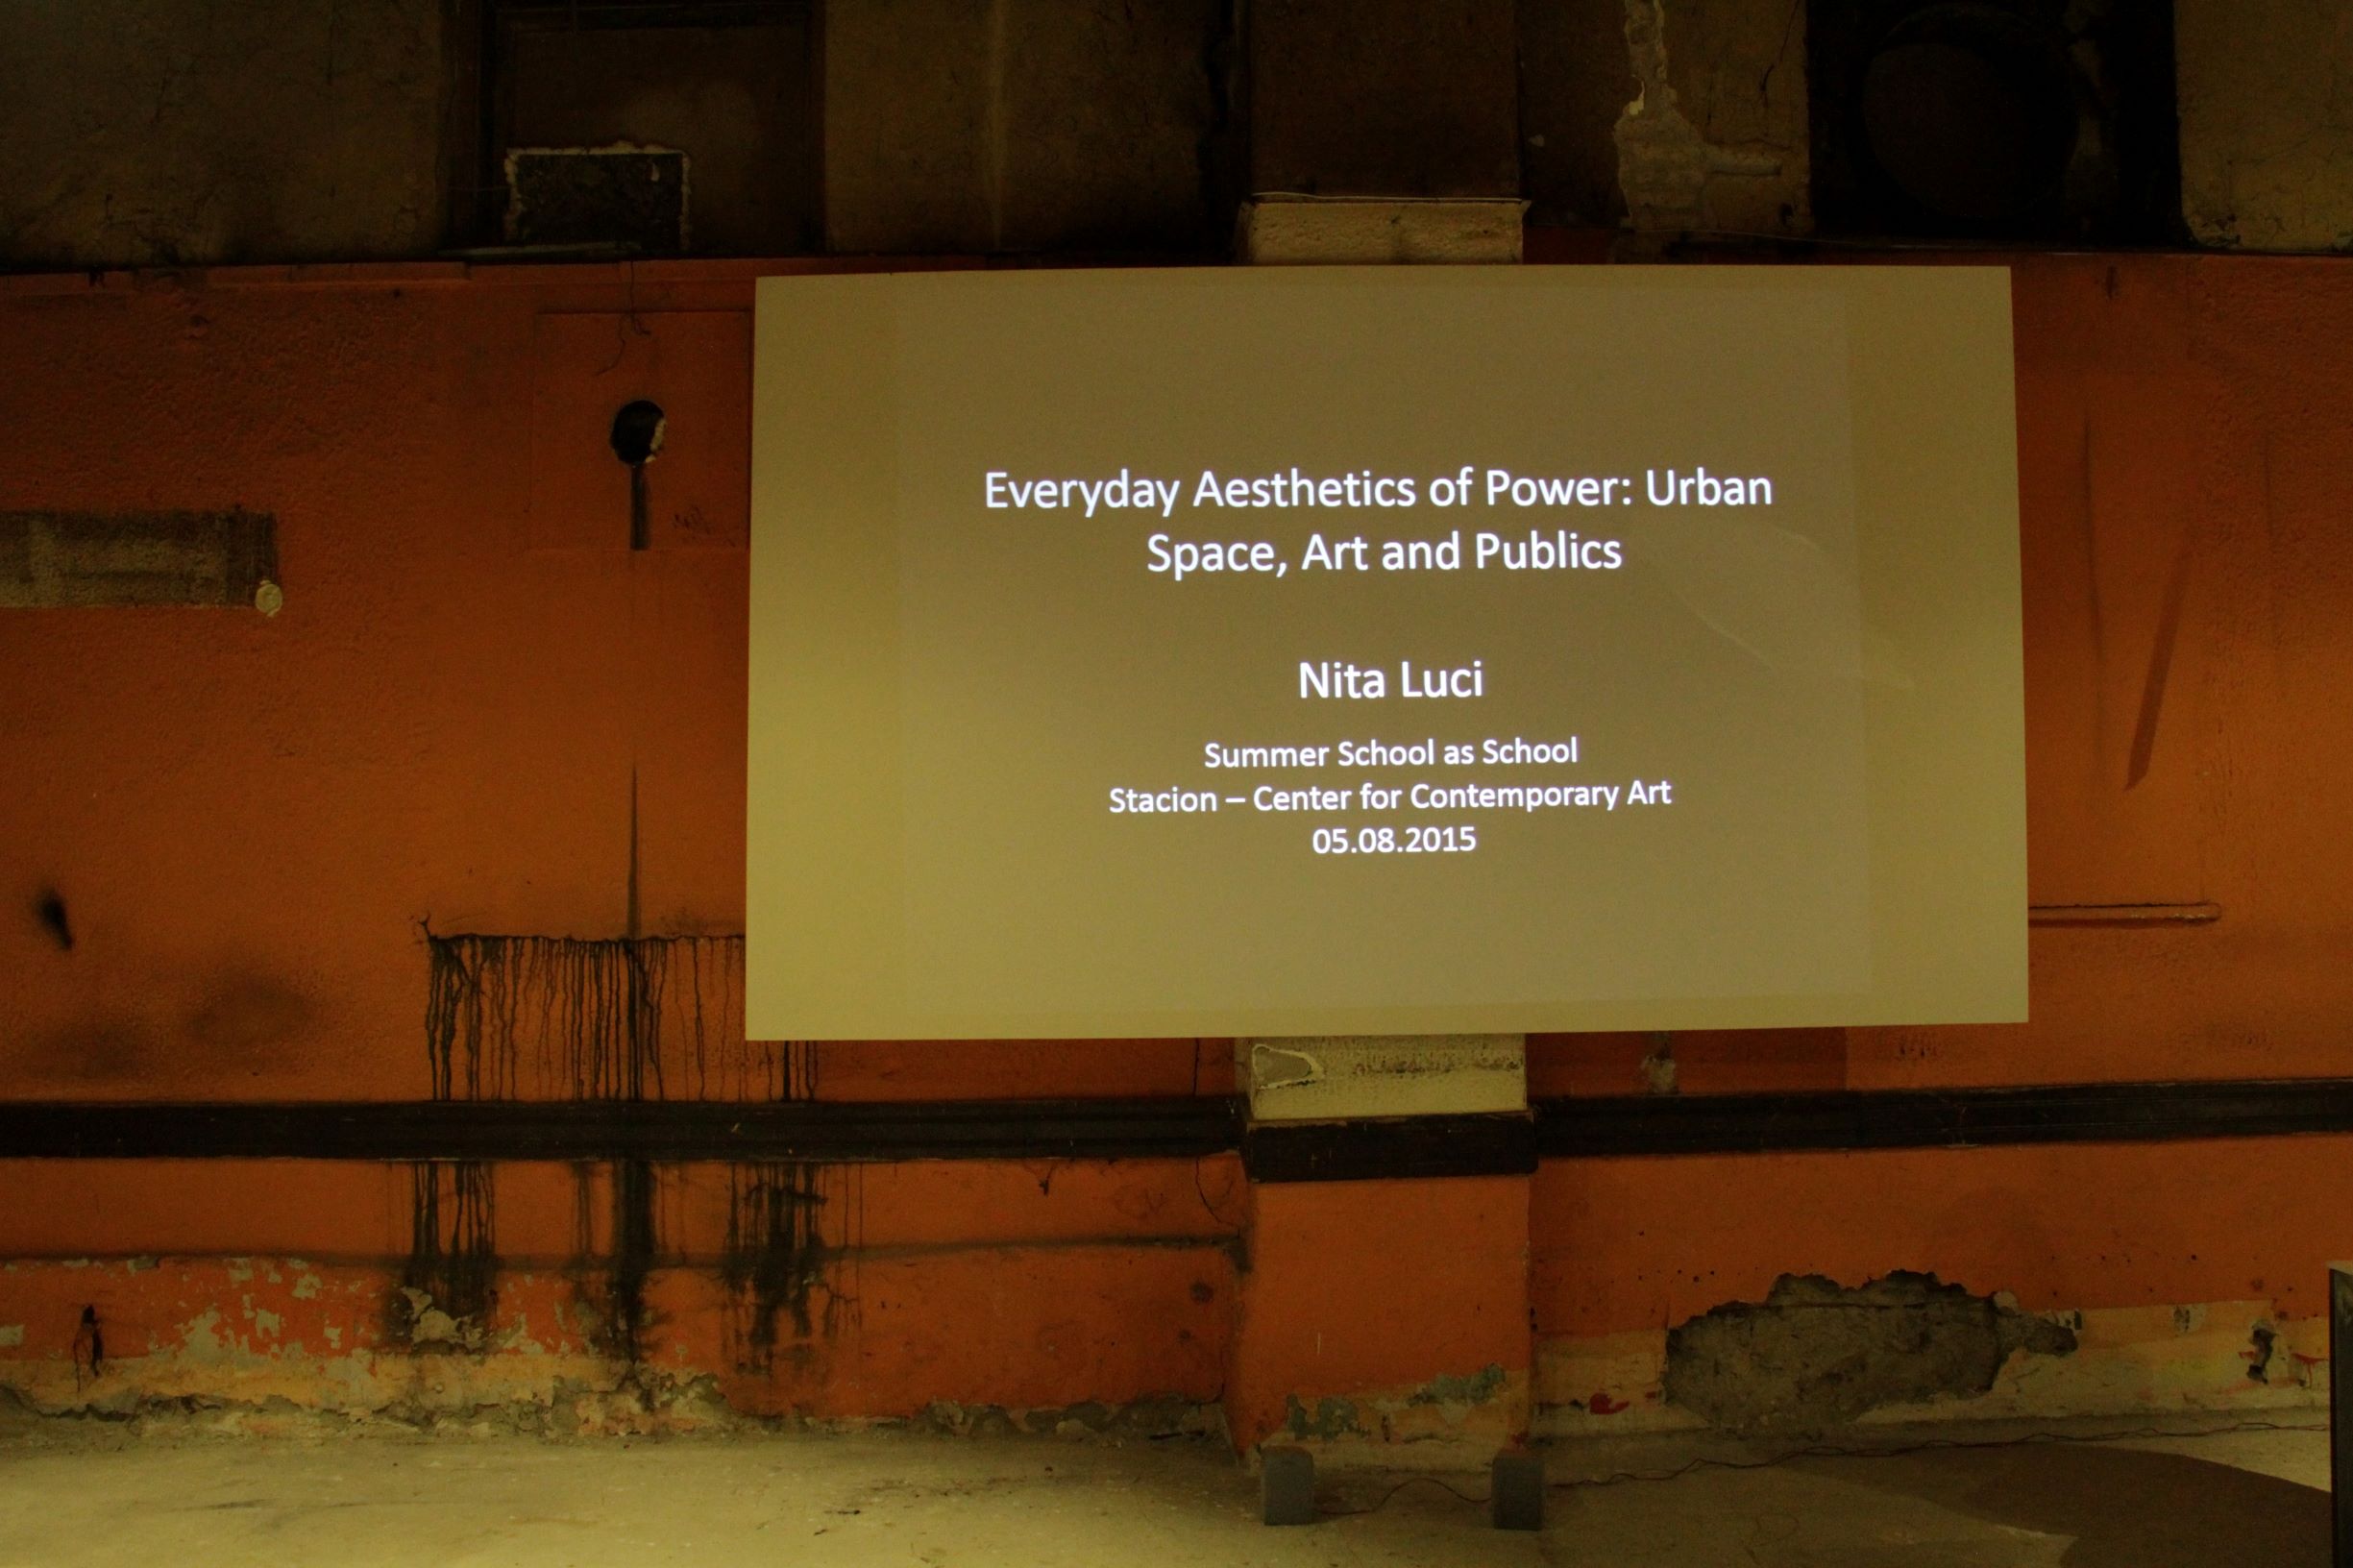 Nita Luci: Everyday Aesthetics of Power: Urban Space, Art and Publics